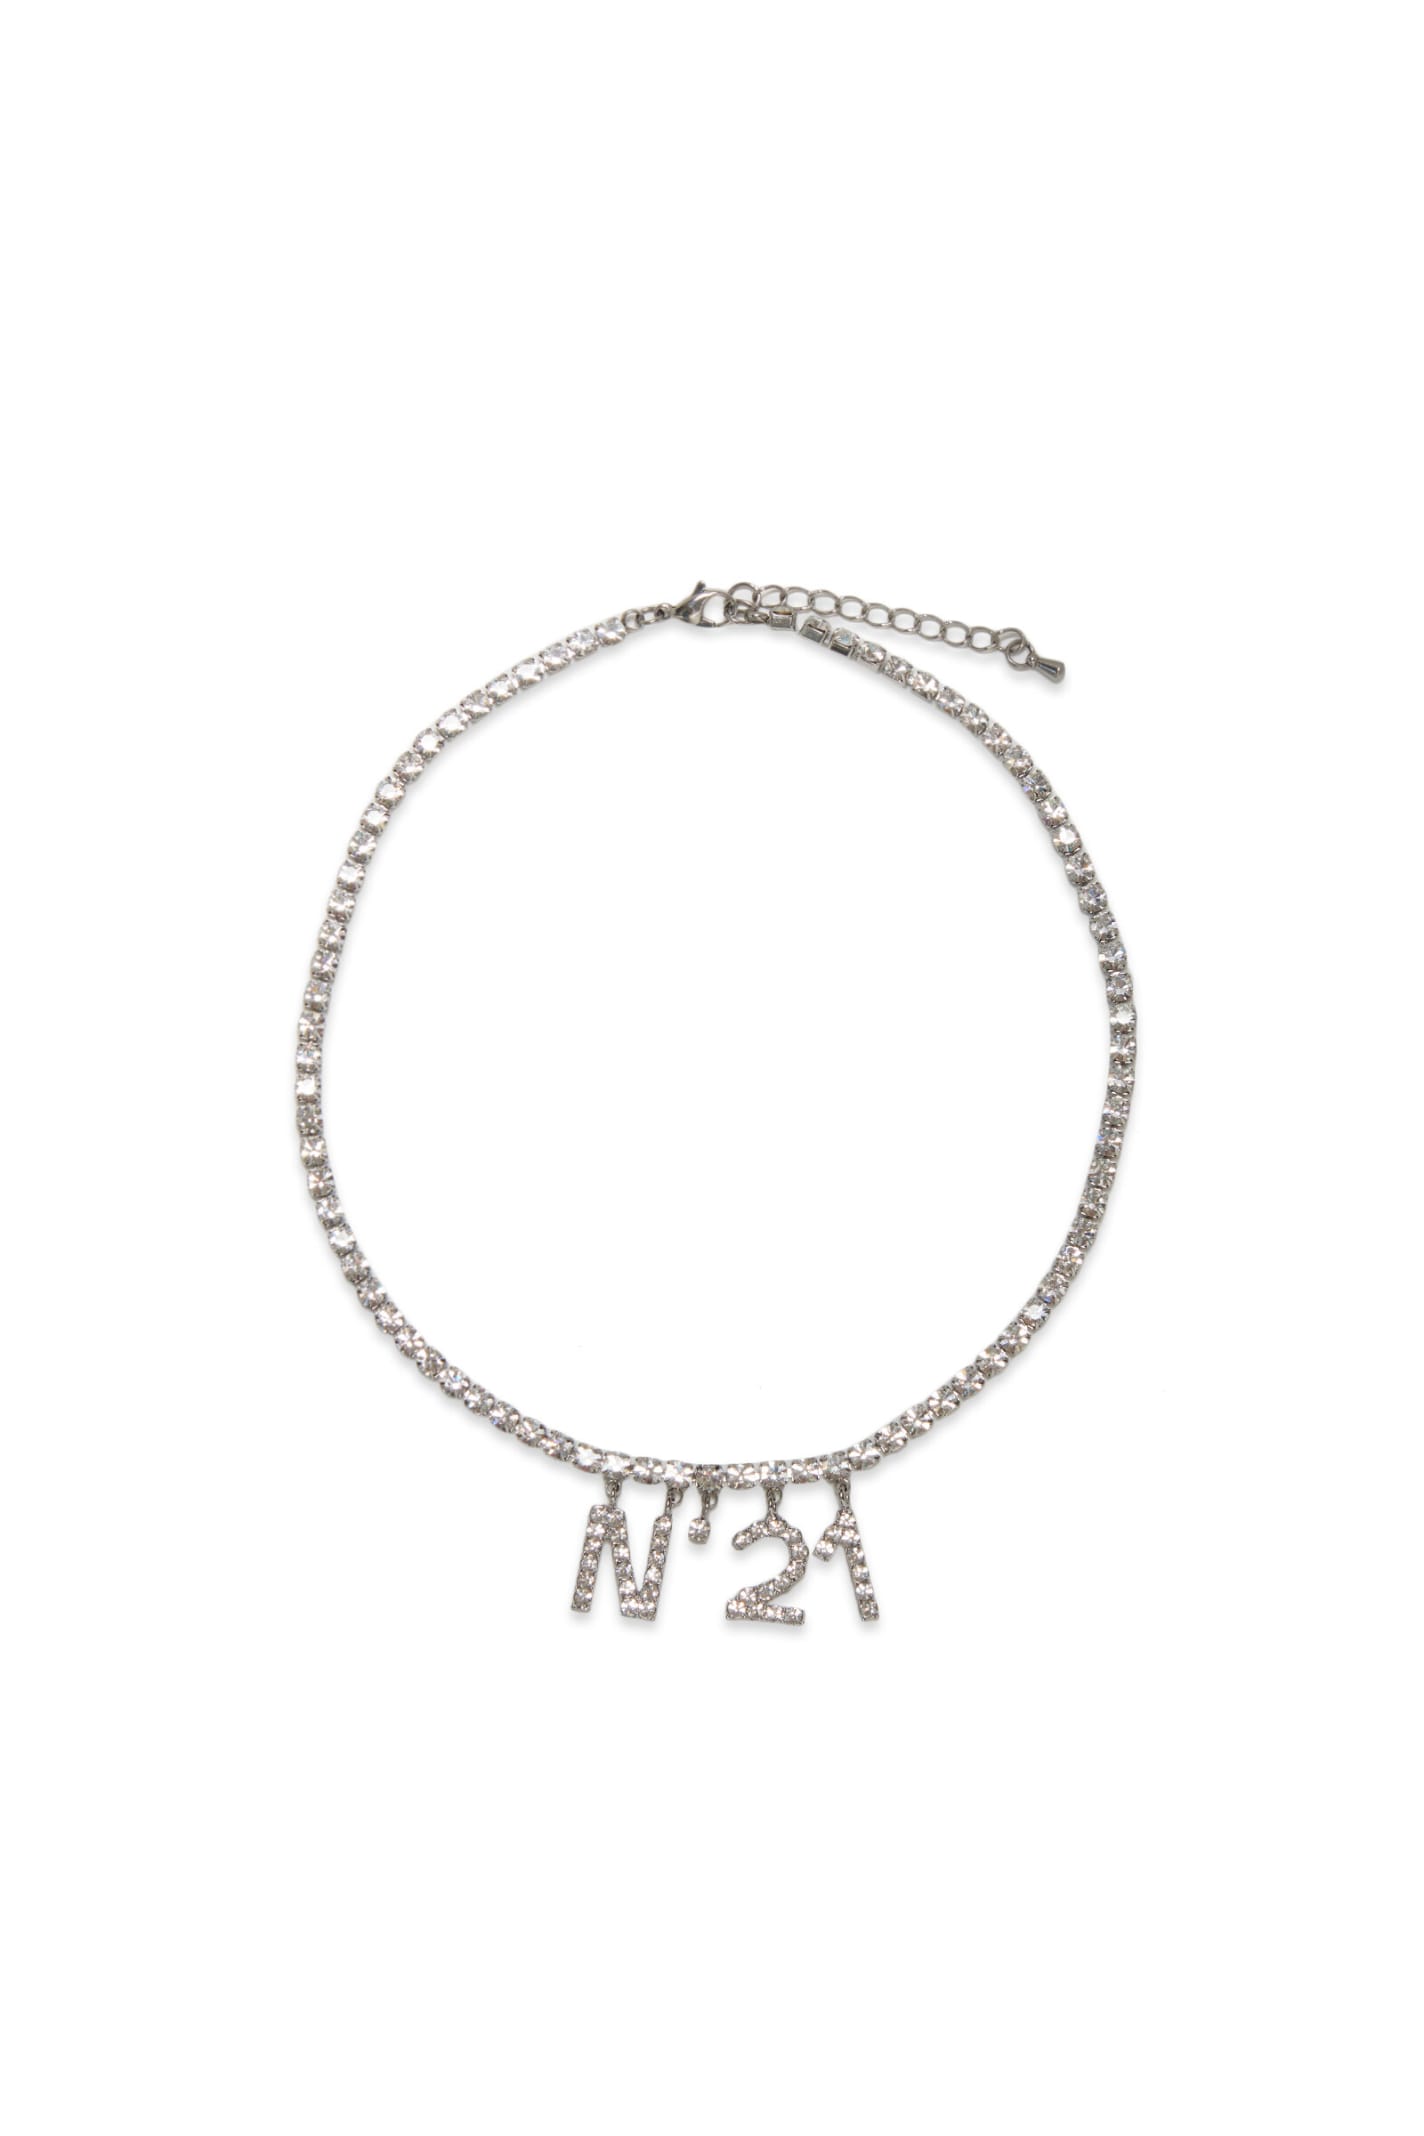 N.21 N21v7f Accessories N°21 Metal Choker Necklace With Stones And Logo Pendant